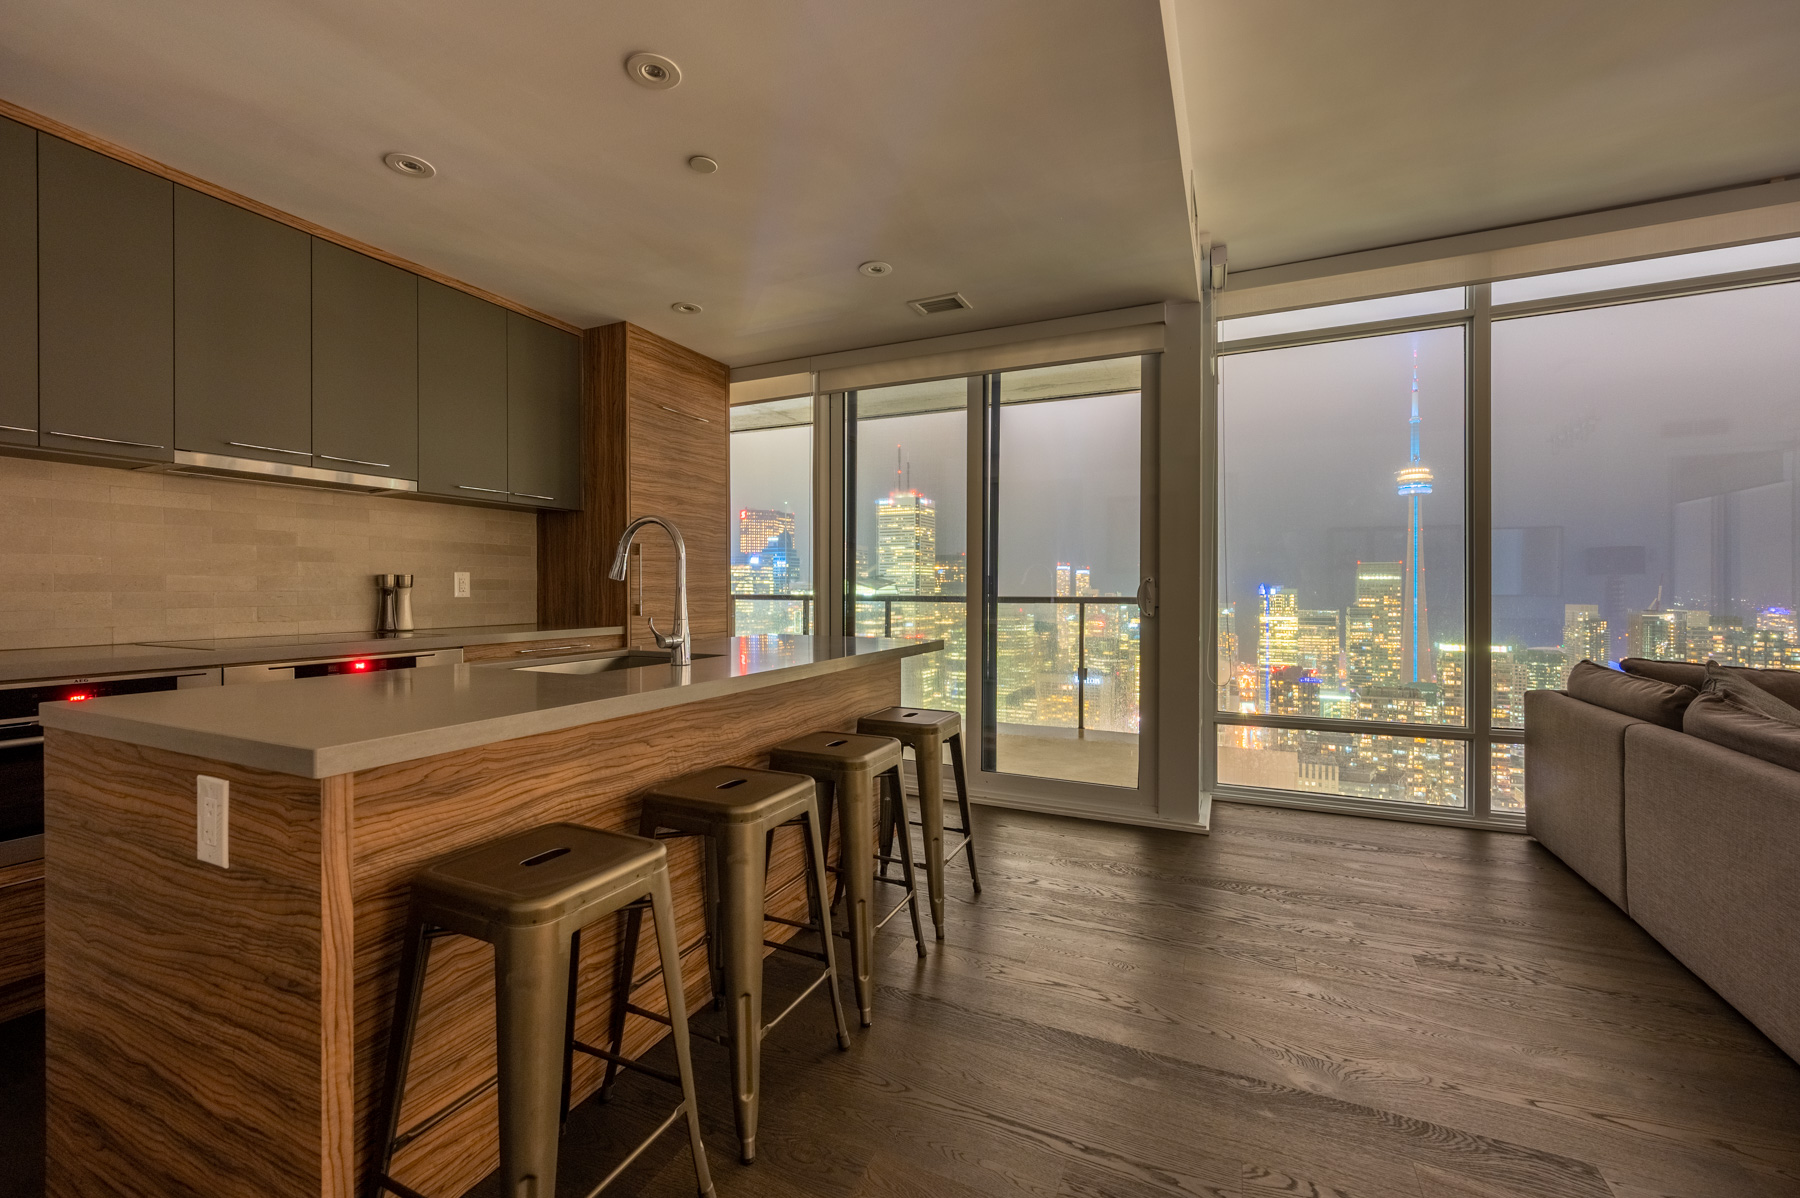 Condo dining room with view of Toronto at night.